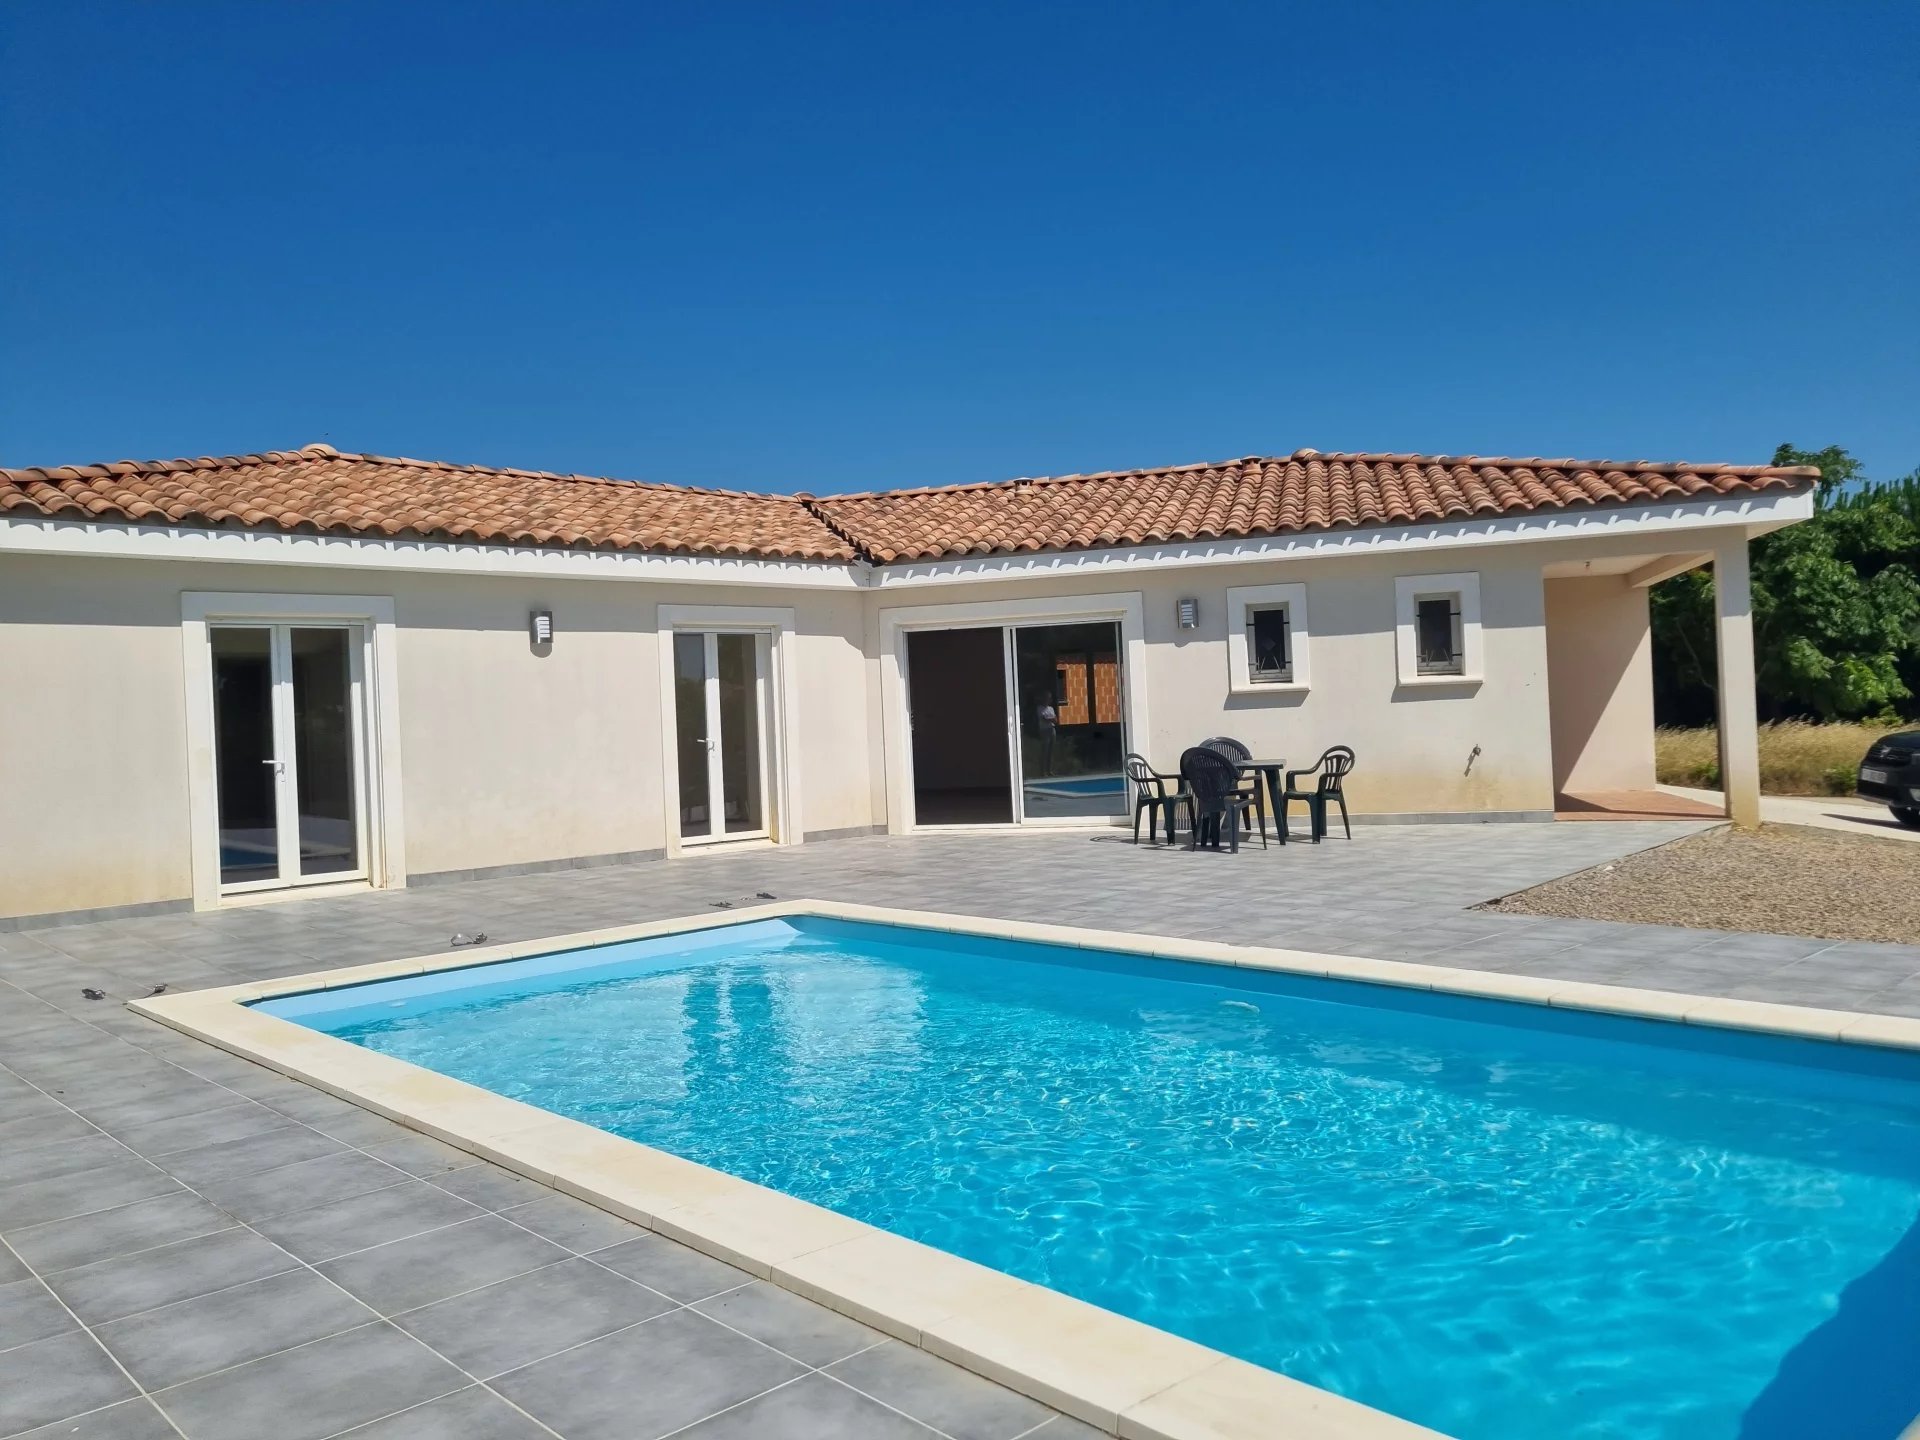 Beautiful 4 bedroom bungalow, pool garden, terraces and views, in a Minervois village